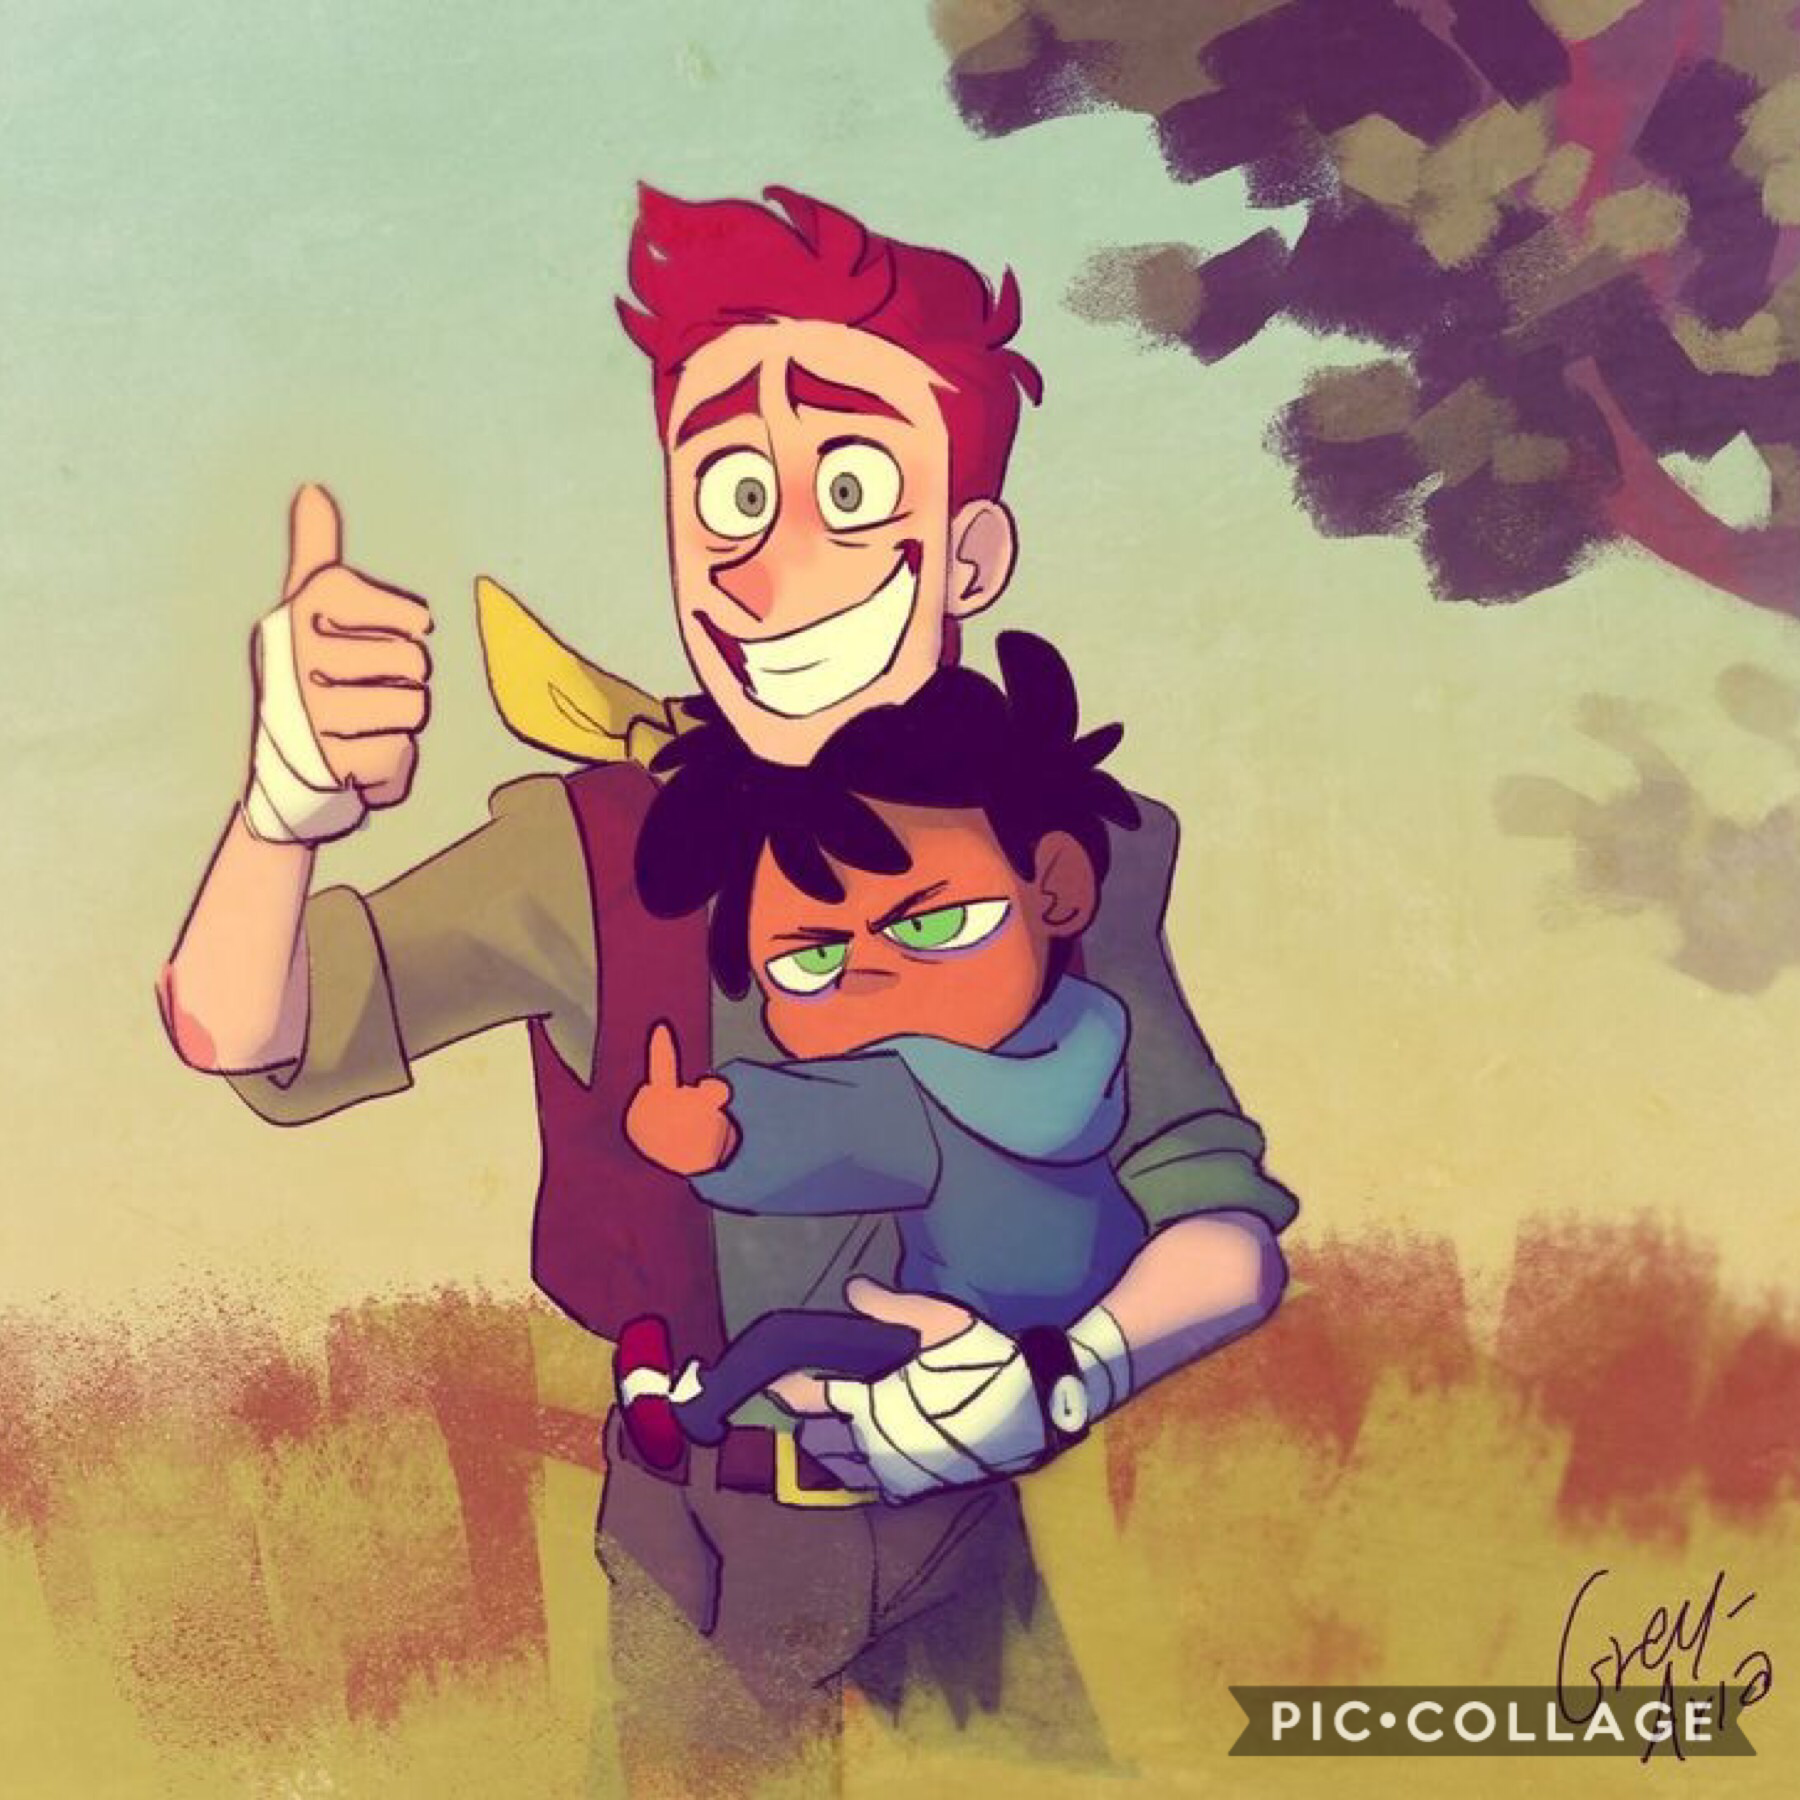 i really want to post but idk what to post lol there’s like nothing in my camera roll and i can’t think of anything interesting to say oops

so anyway ig just enjoy this art of max and david lol (not my art)